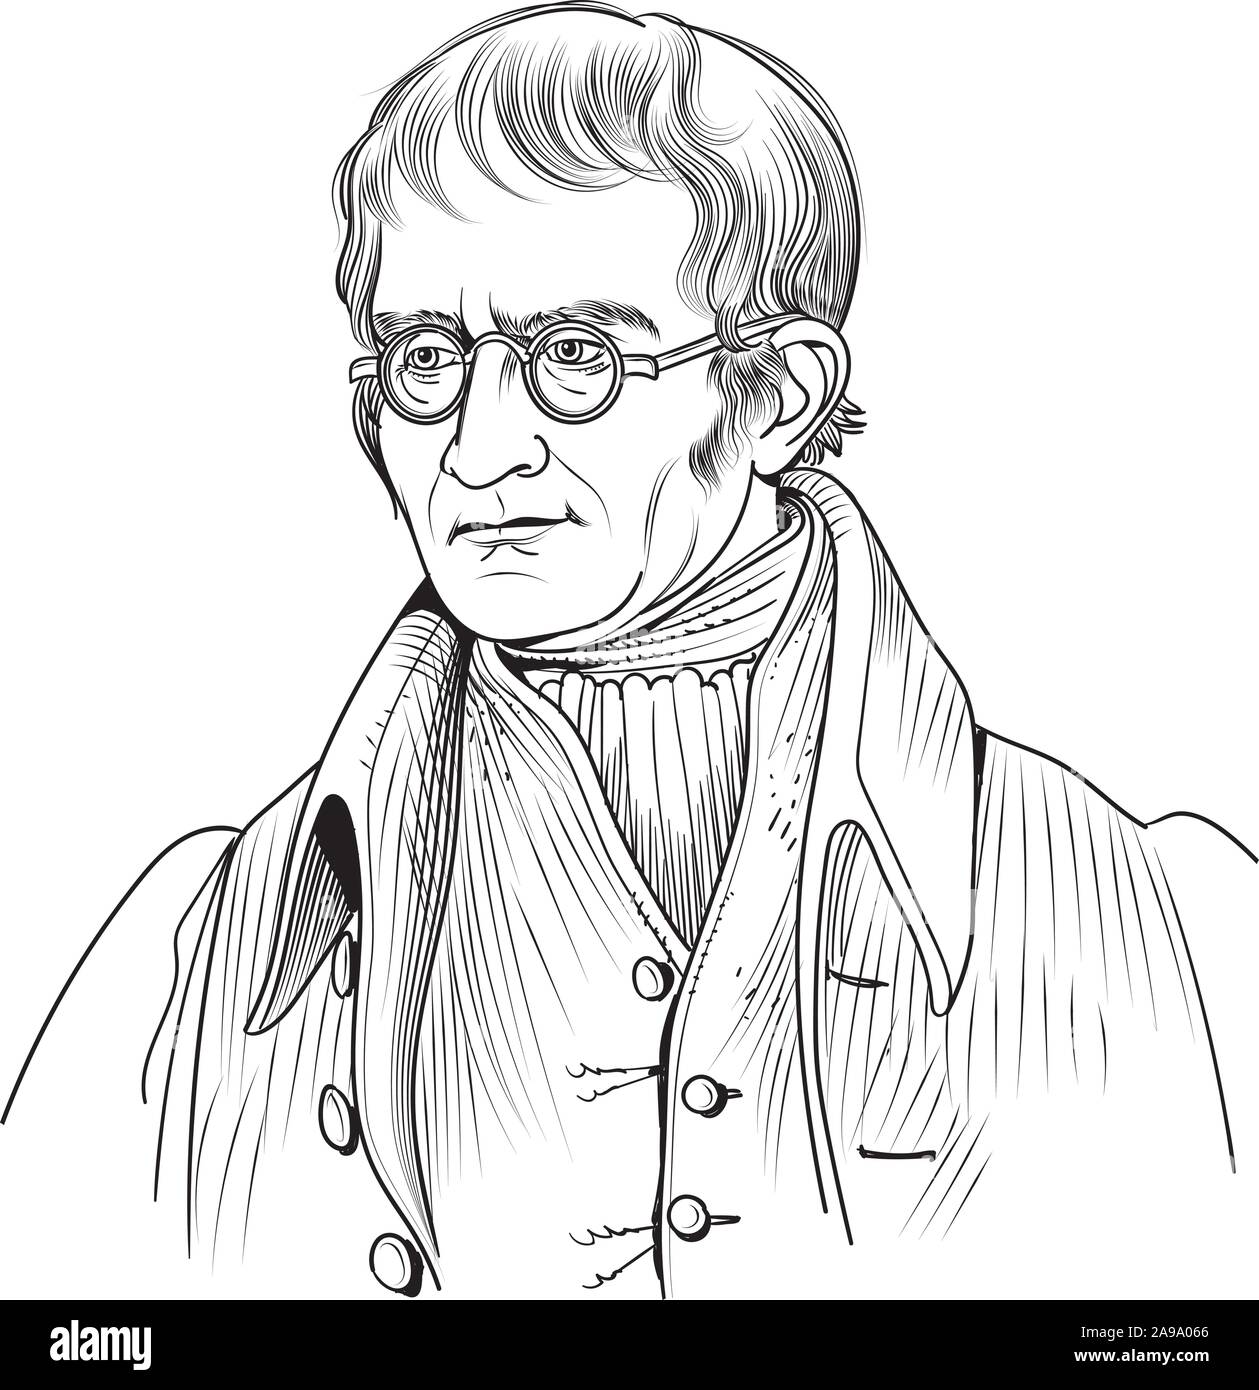 John Dalton cartoon portrait. He was an English chemist, physicist and meteorologist. He introduced the modern atomic theory into chemistry. Stock Vector